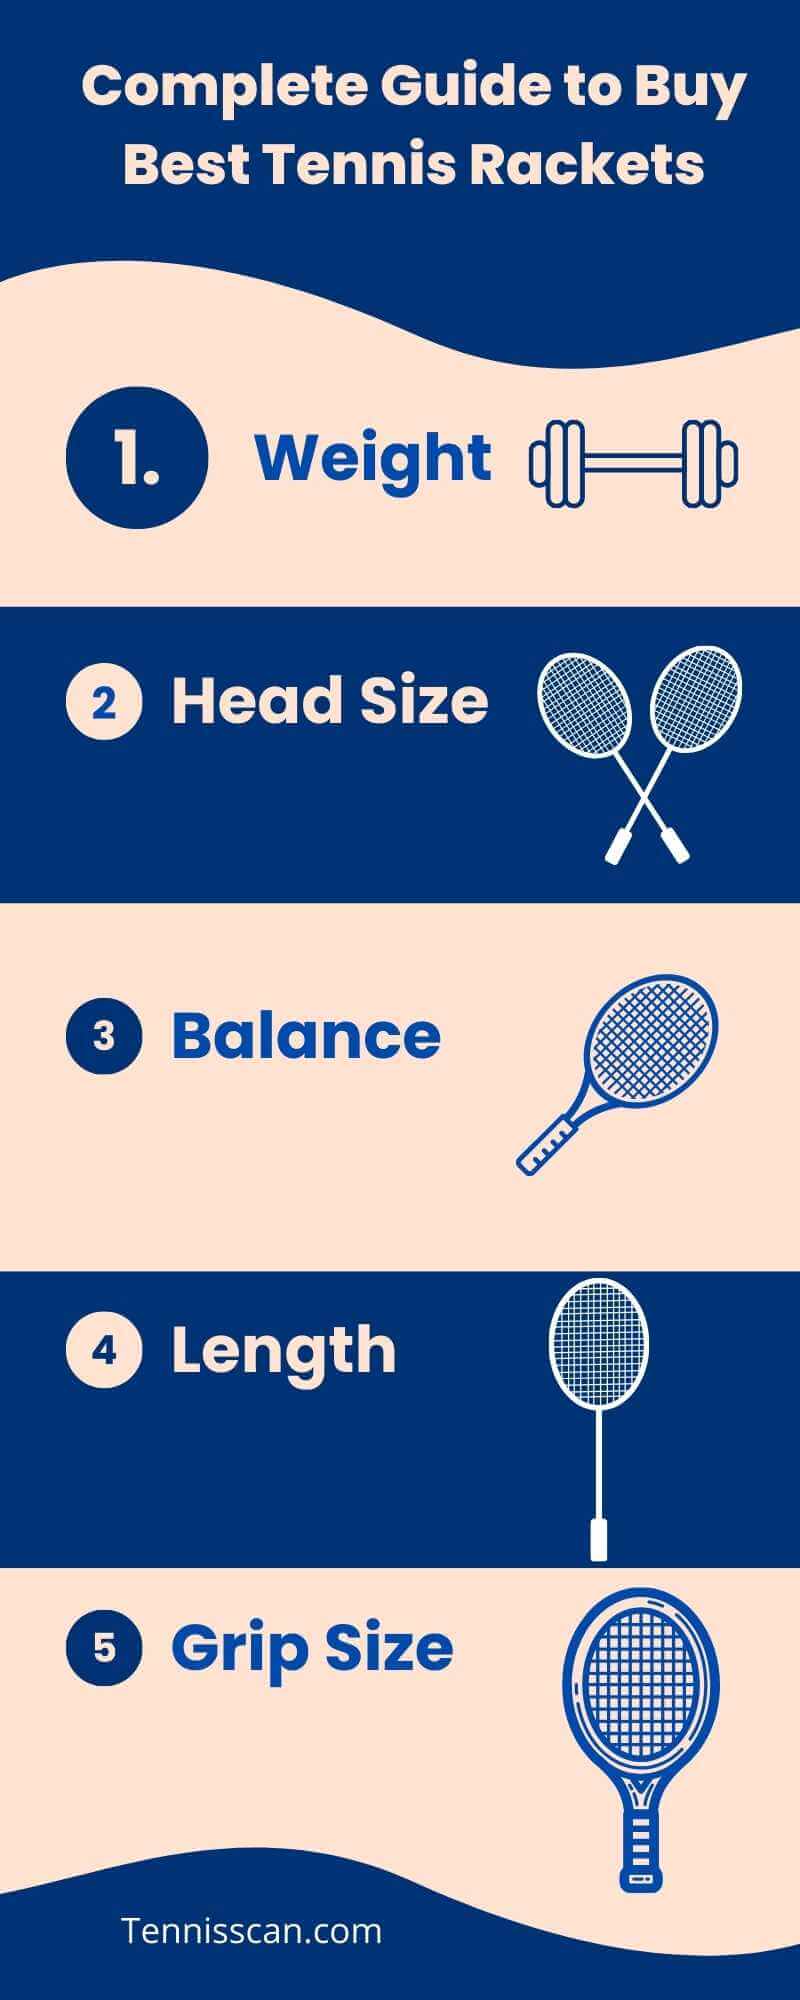 Complete Guide to Buy Best Tennis Rackets